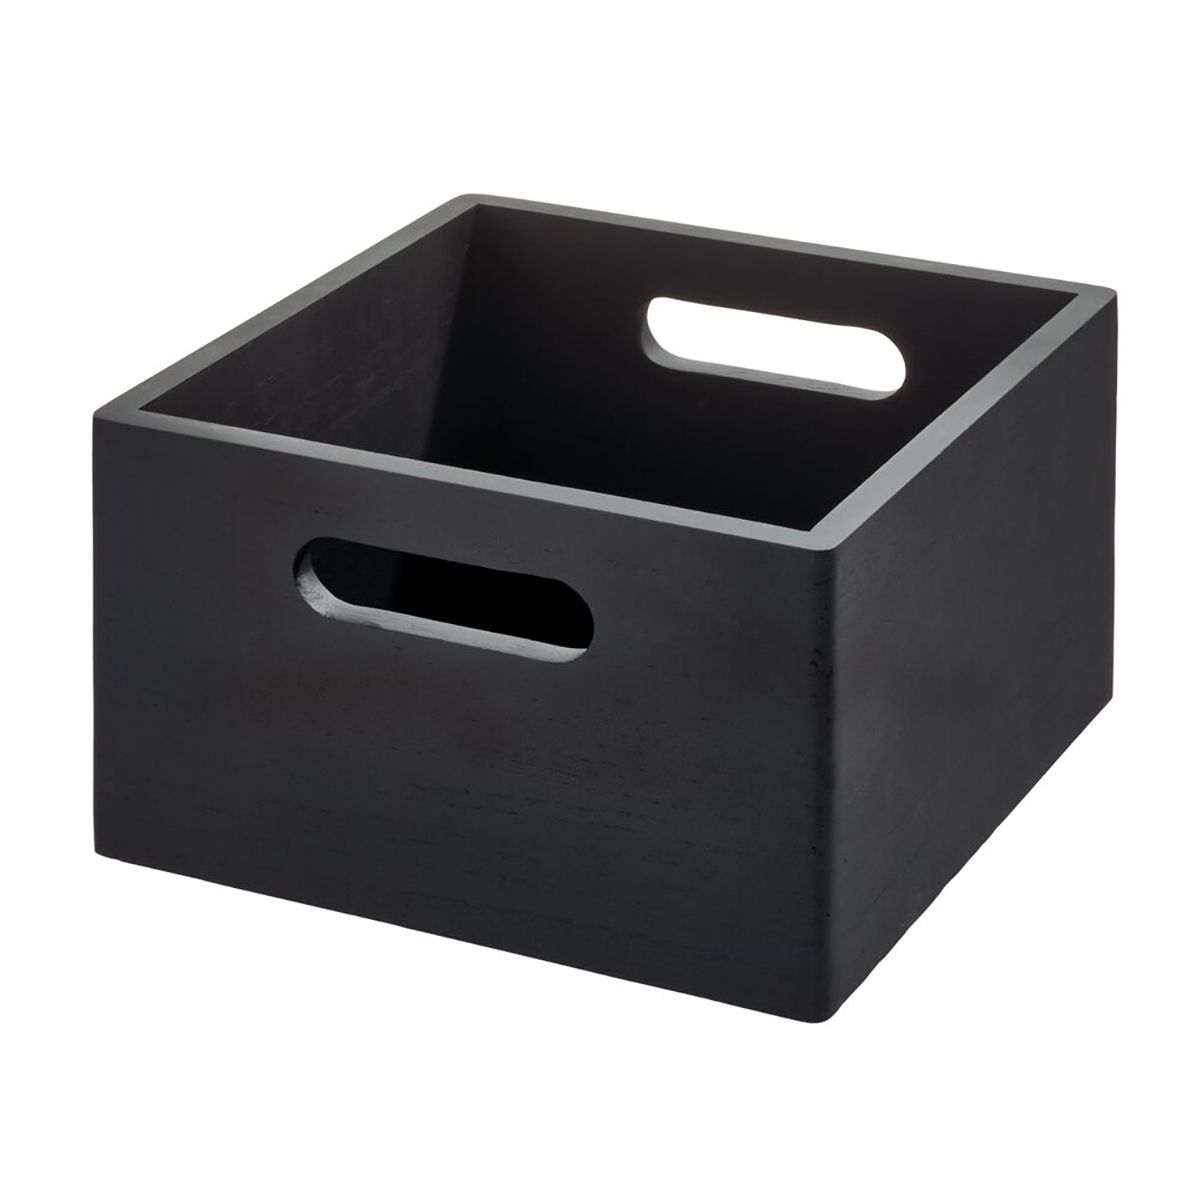 THE HOME EDIT Wooden All-Purpose Bin Onyx | The Container Store